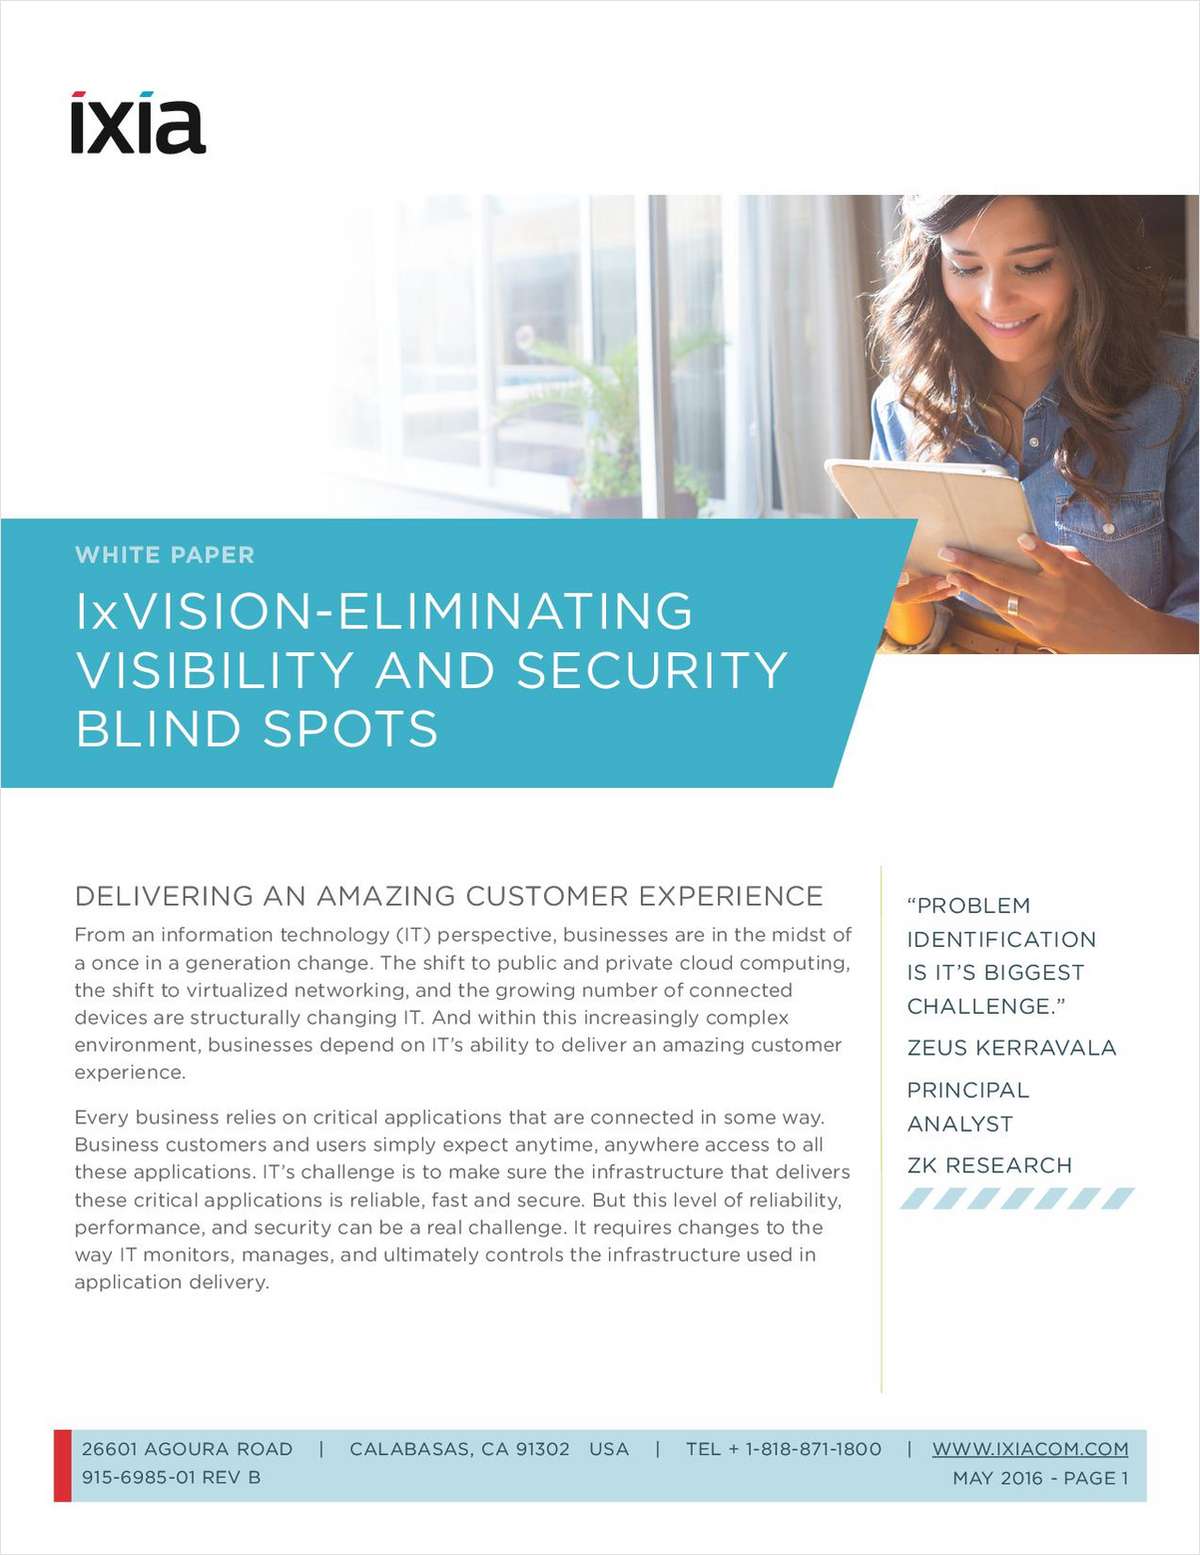 IxVision - Eliminating Visibility and Security Blind Spots